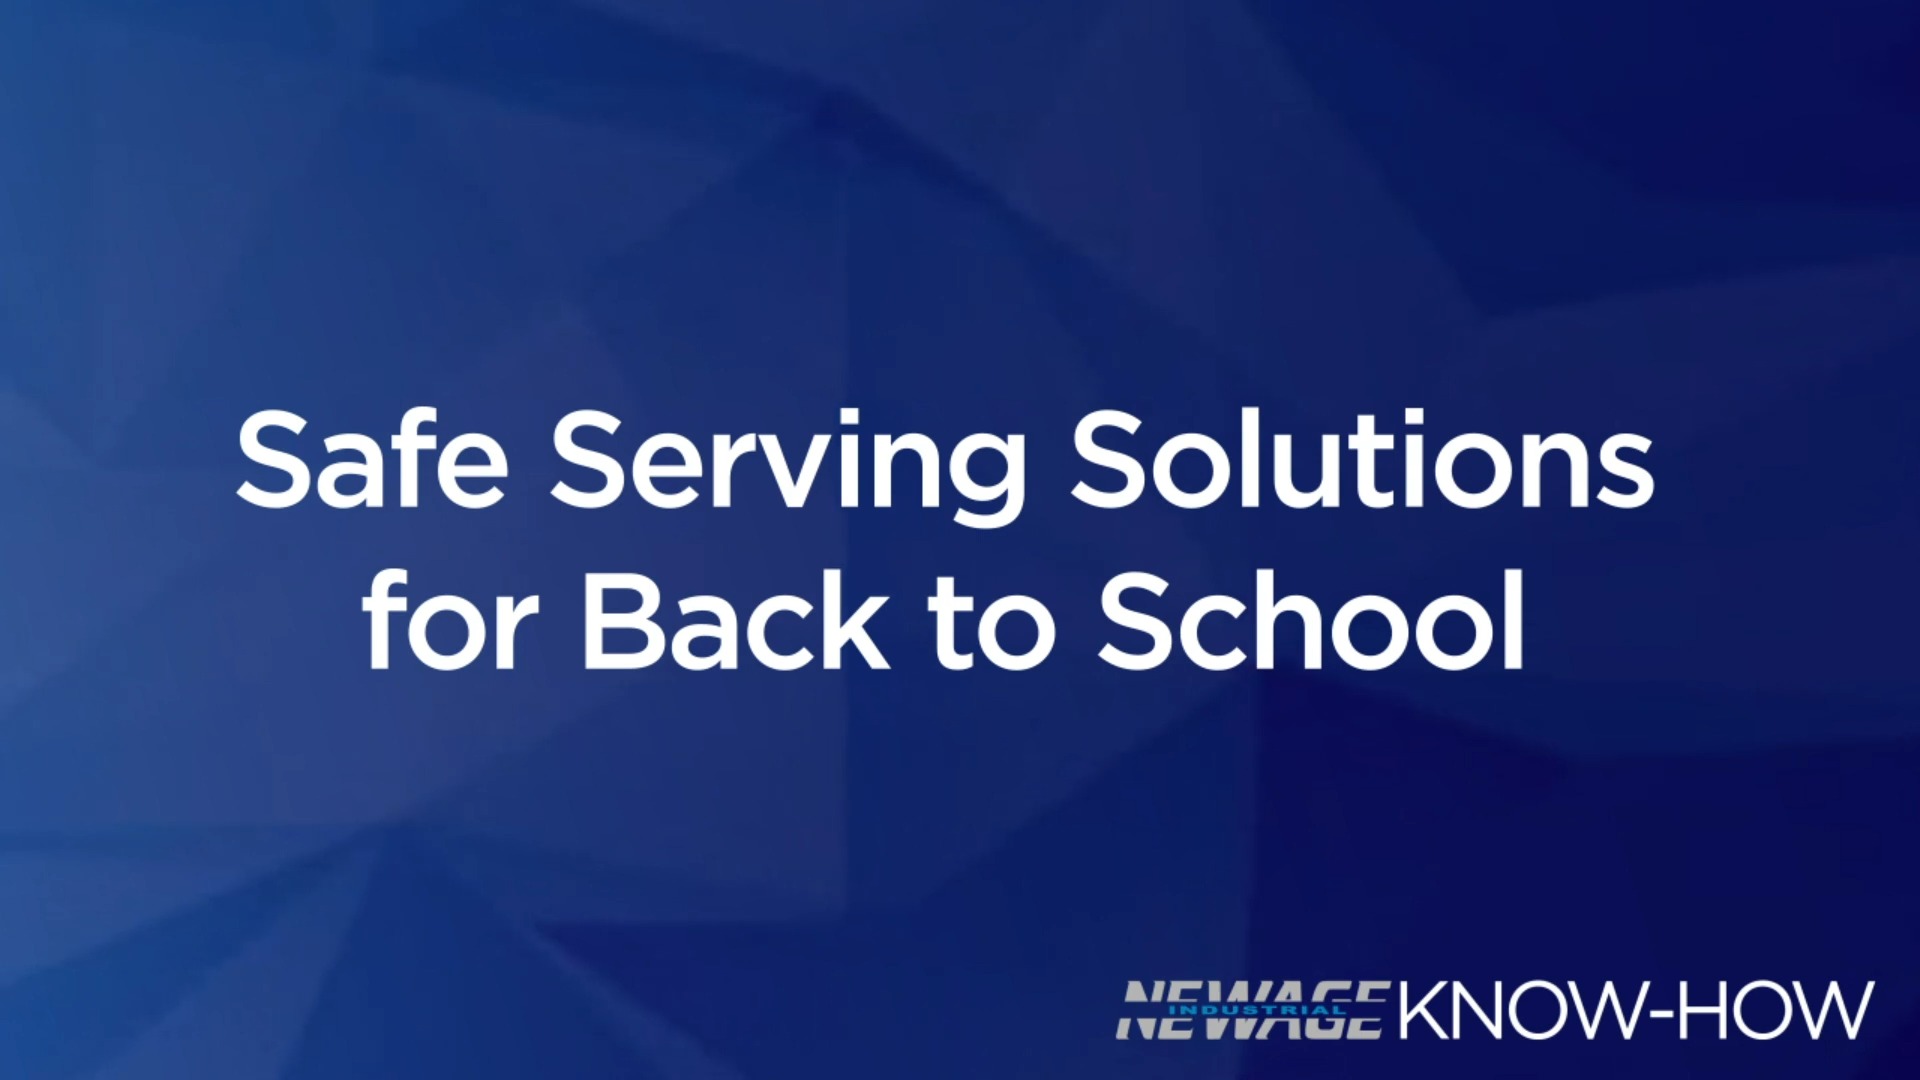 Know-How Video: Safe Serving Solutions for Back to School